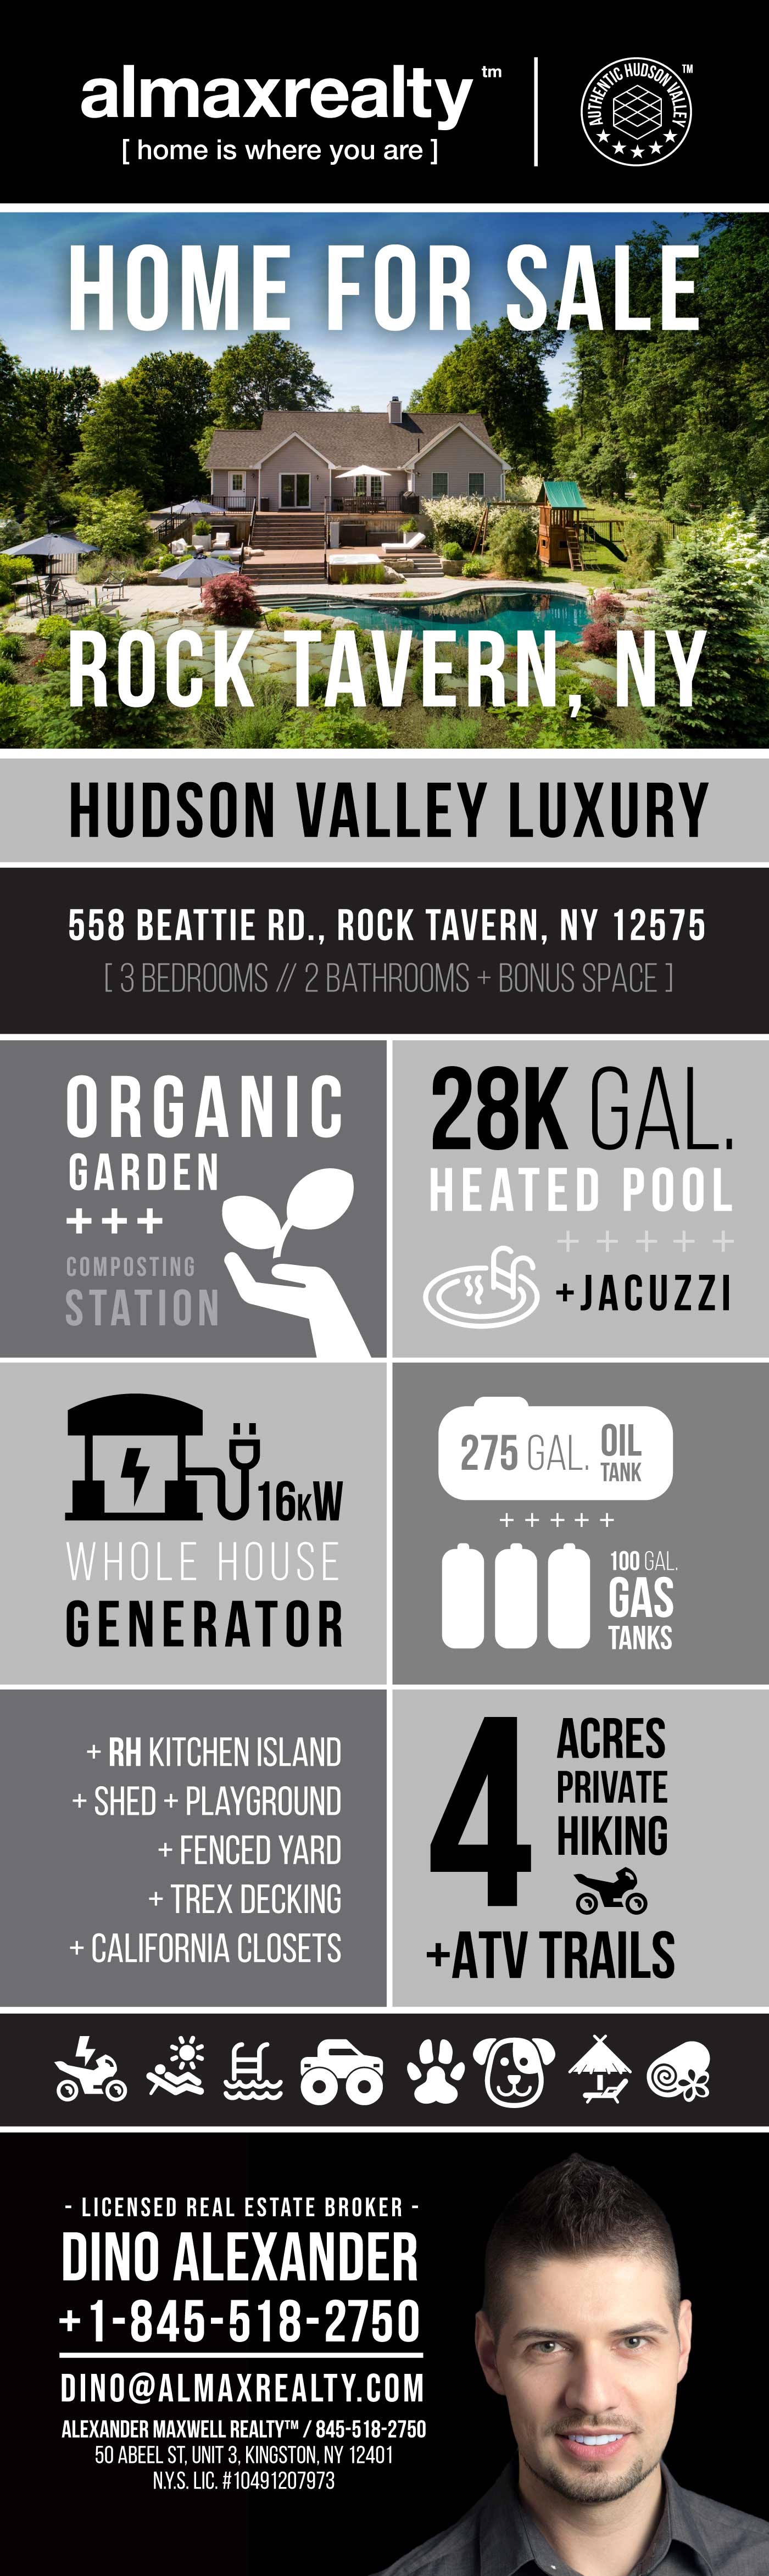 Alexander Maxwell Realty Infographic: Luxury Hudson Valley Home for Sale in Rock Tavern, NY